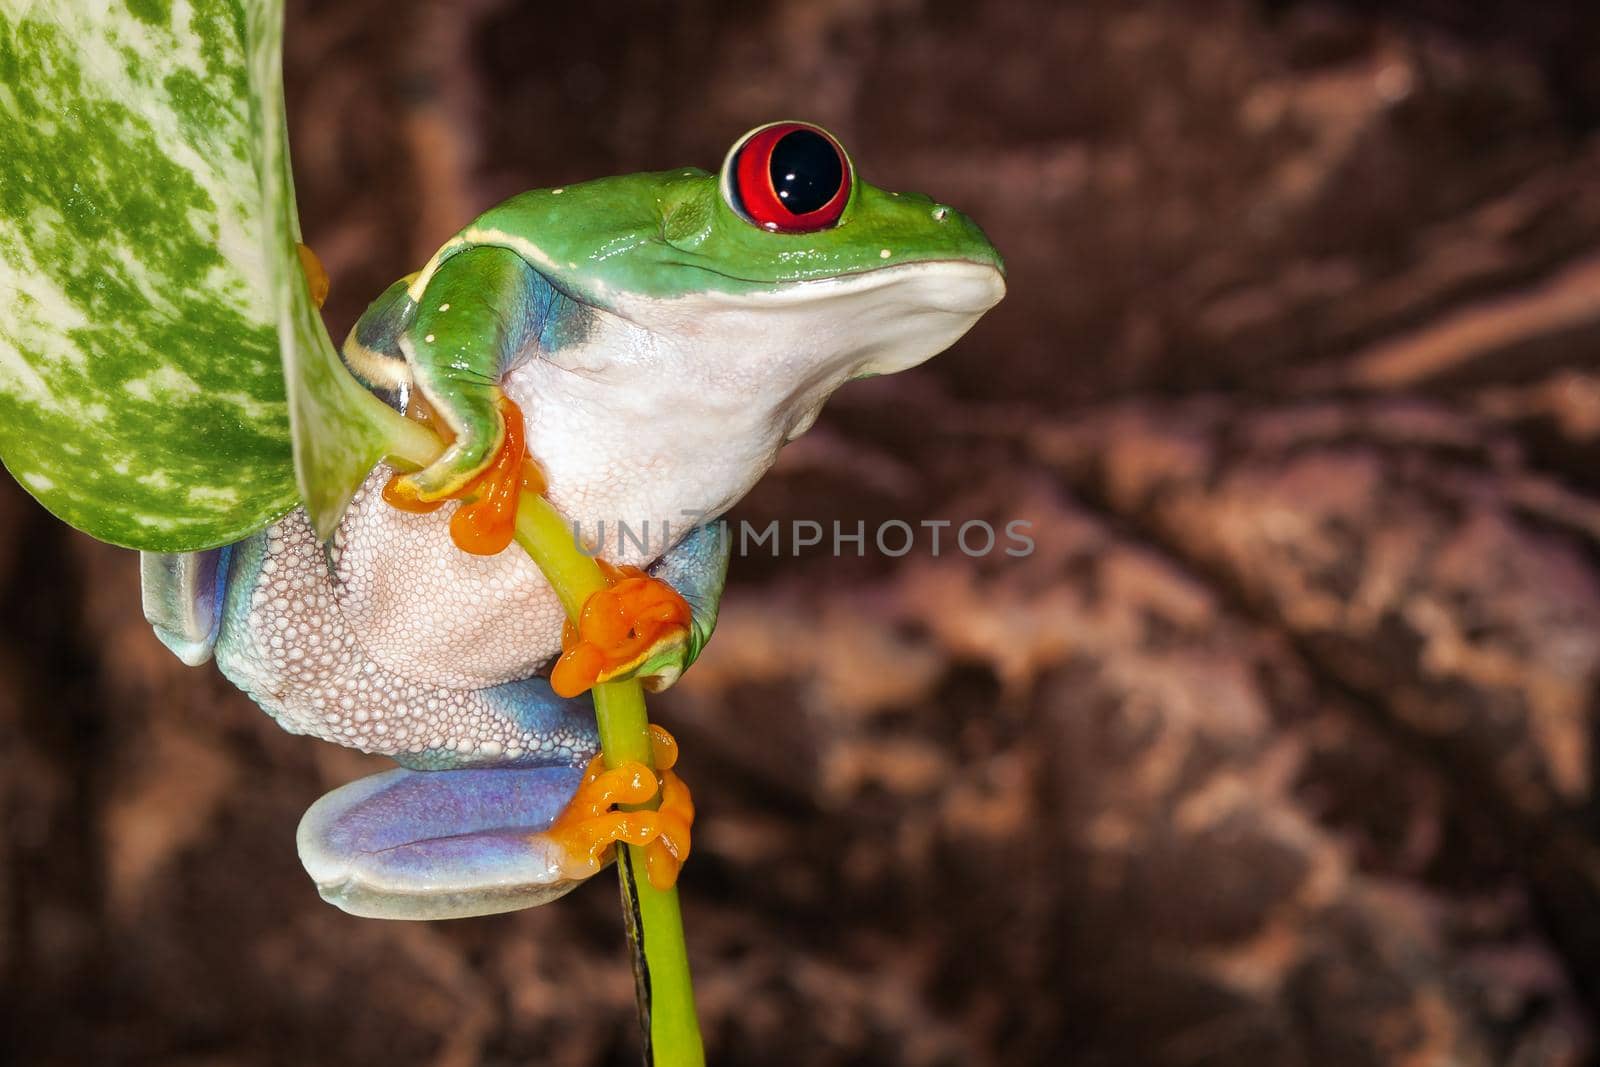 Red eyed tree frog swings on the plant stem with leaf